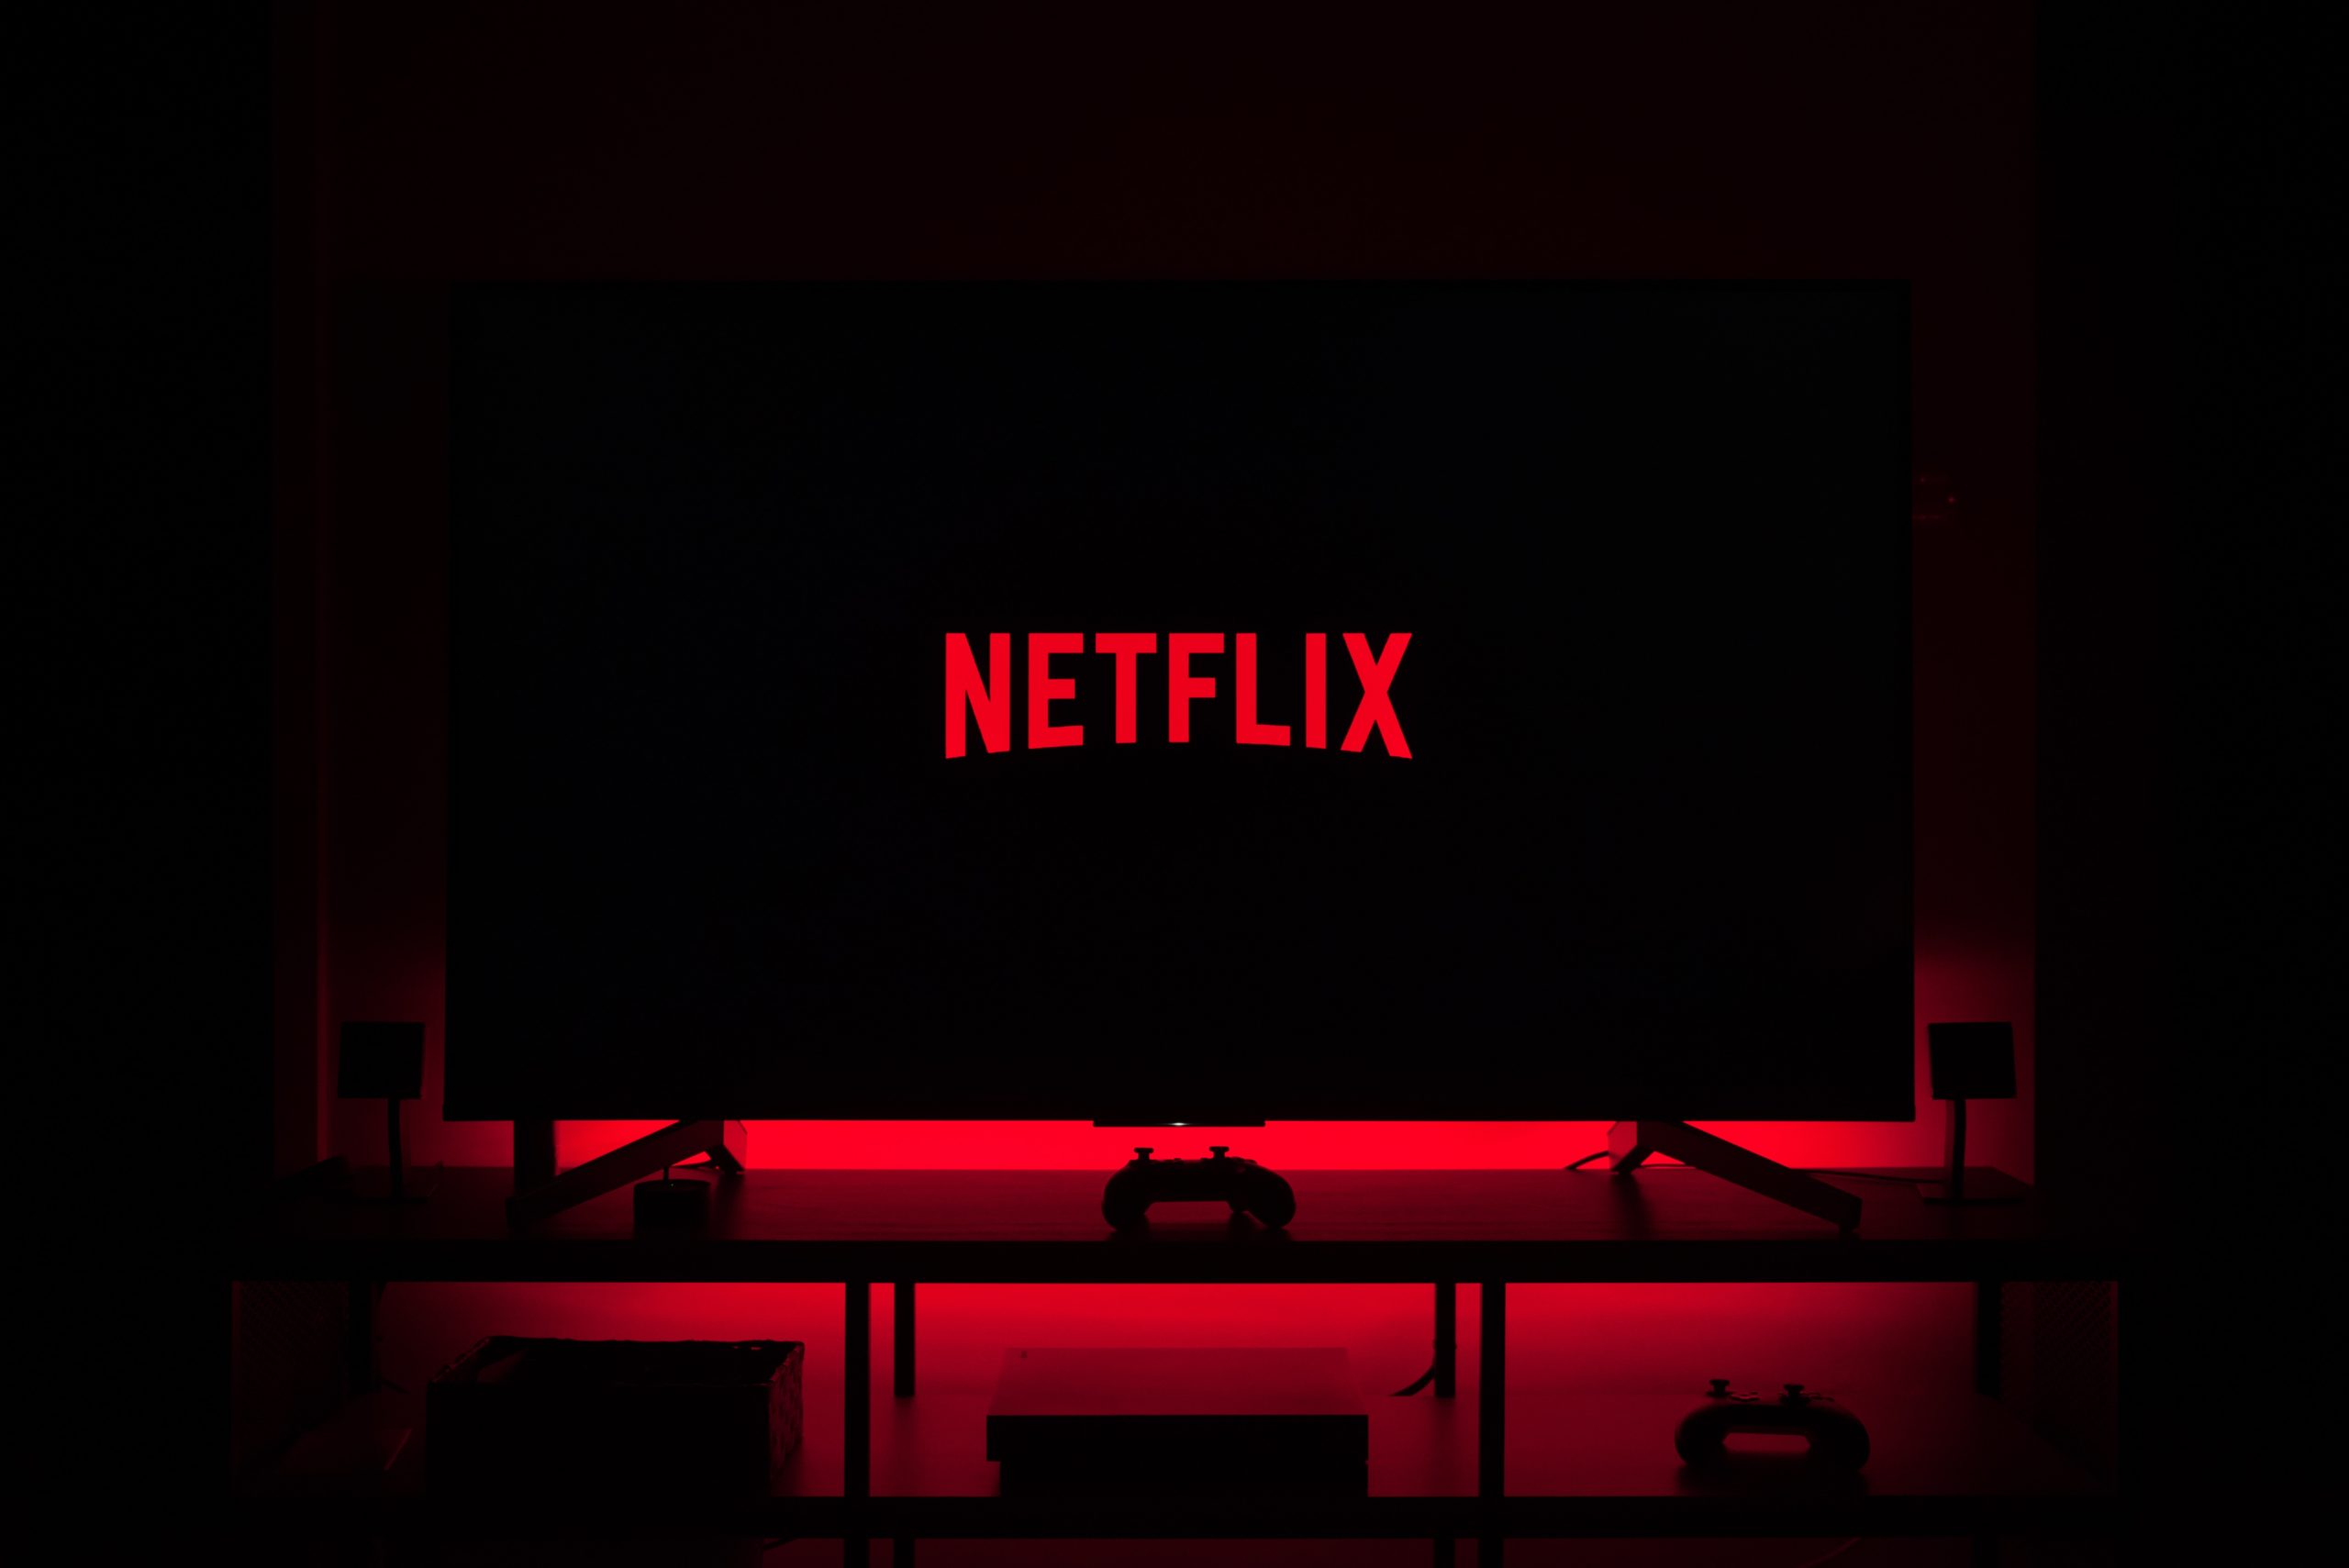 Netflix yet to confirm the release date of the comedy series